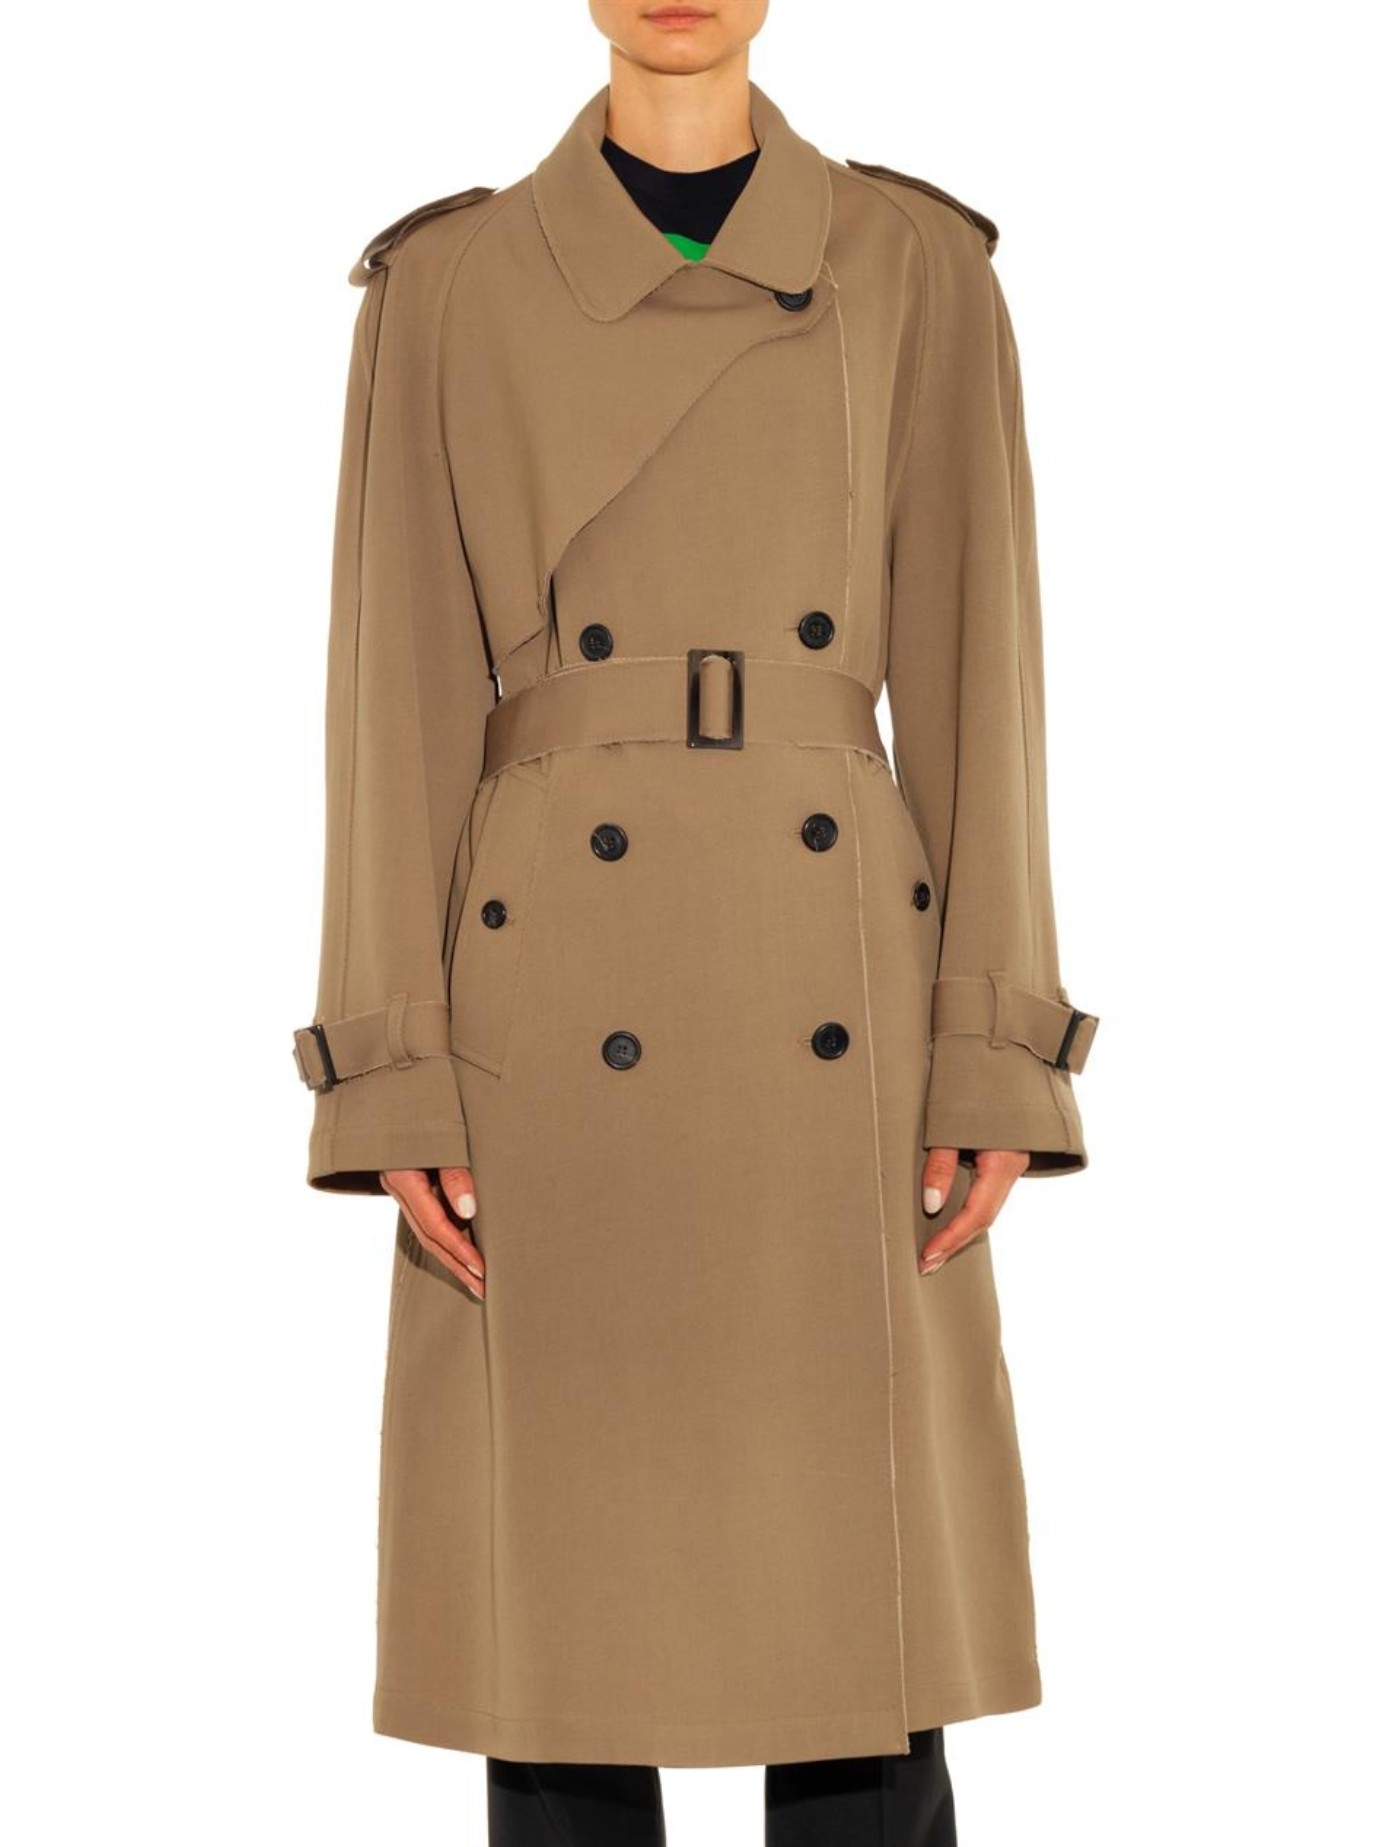 Lyst - JW Anderson Wool-Blend Drill Trench Coat in Brown